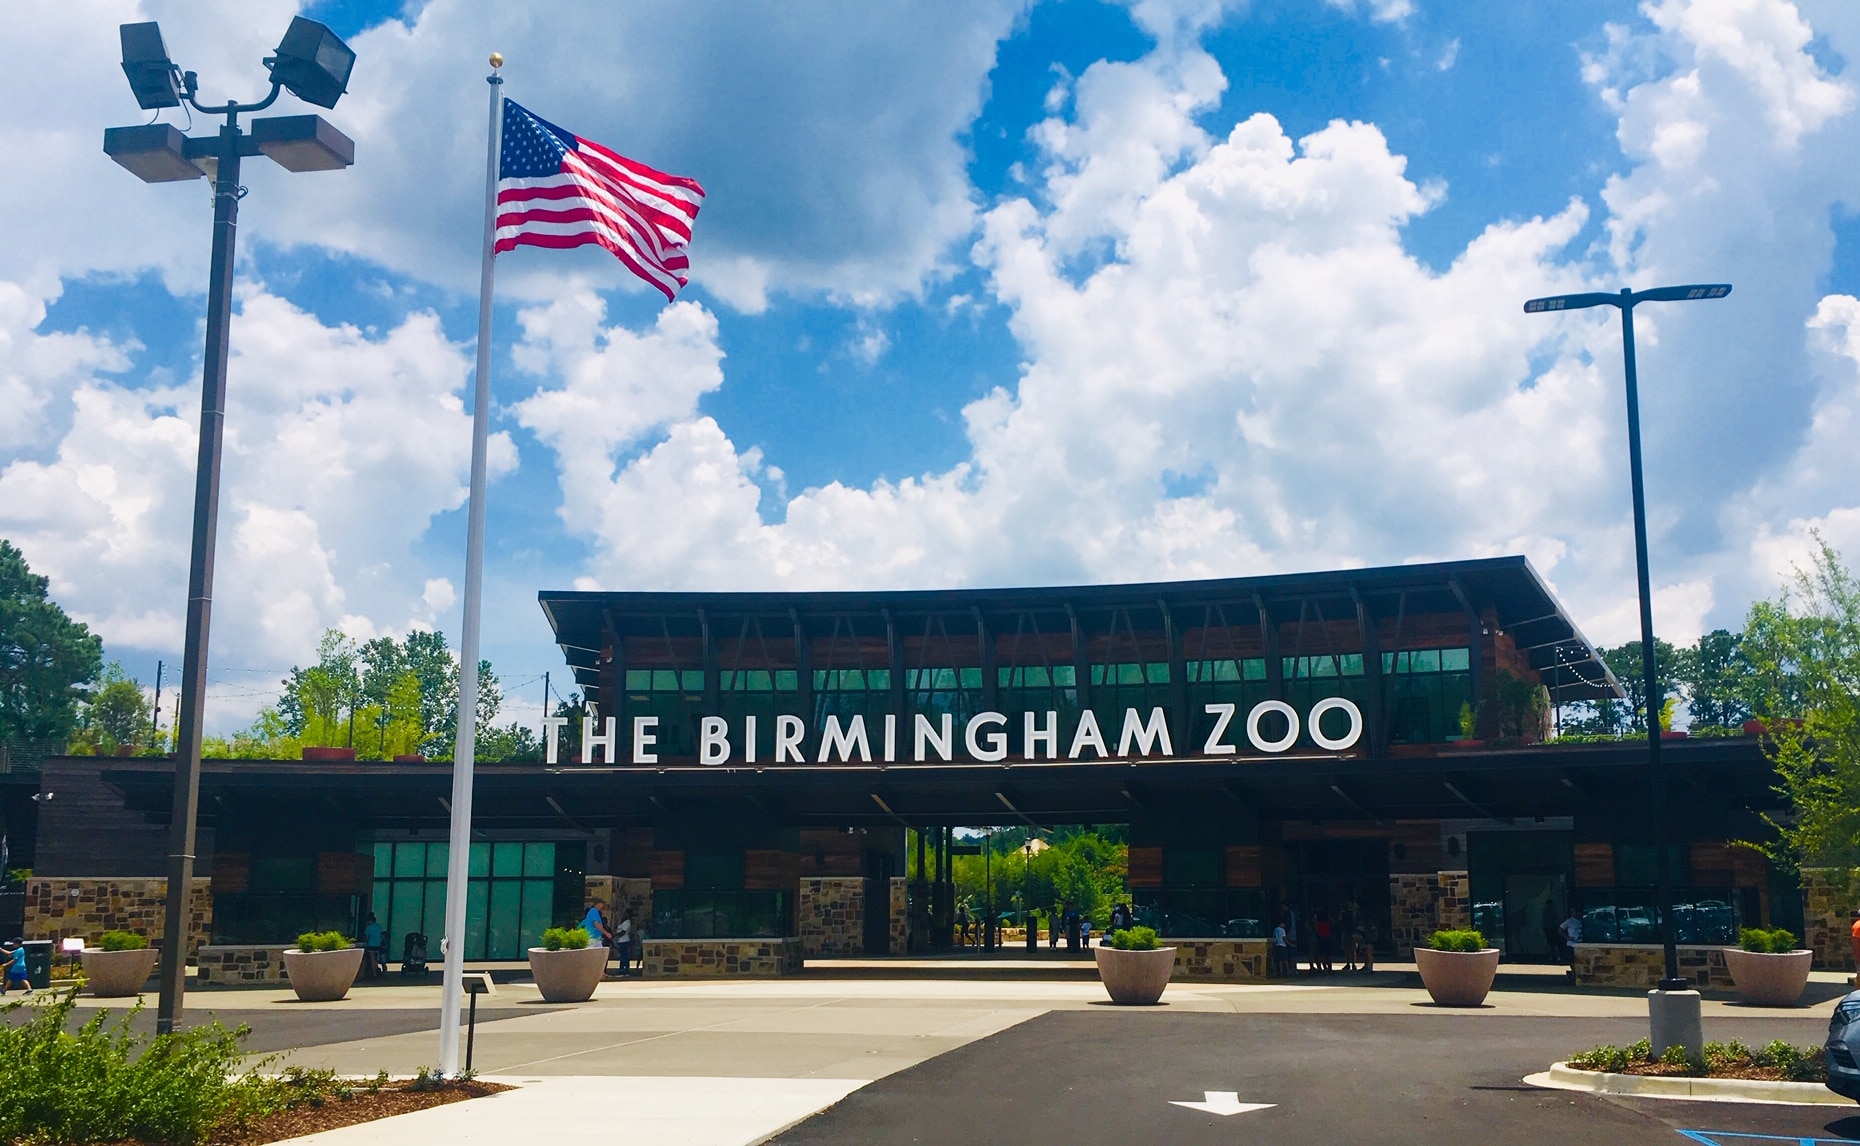 Entrance of The Birmingham Zoo. Venue for The Community Foundation of Greater Birmingham’s Thriving Communities event on August 15